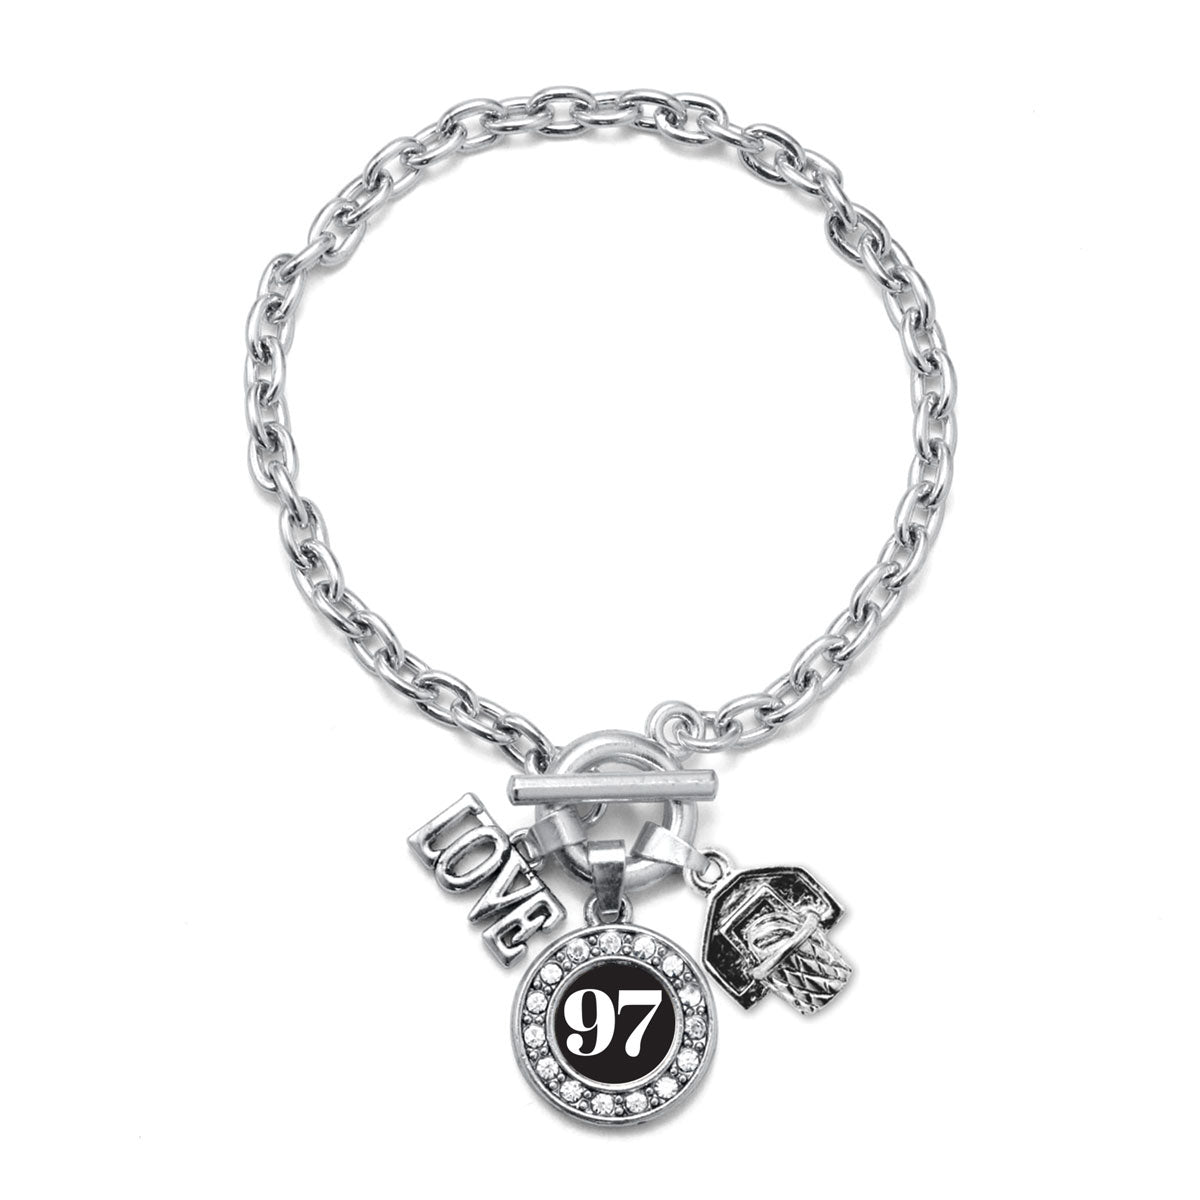 Silver Basketball Hoop - Sports Number 97 Circle Charm Toggle Bracelet